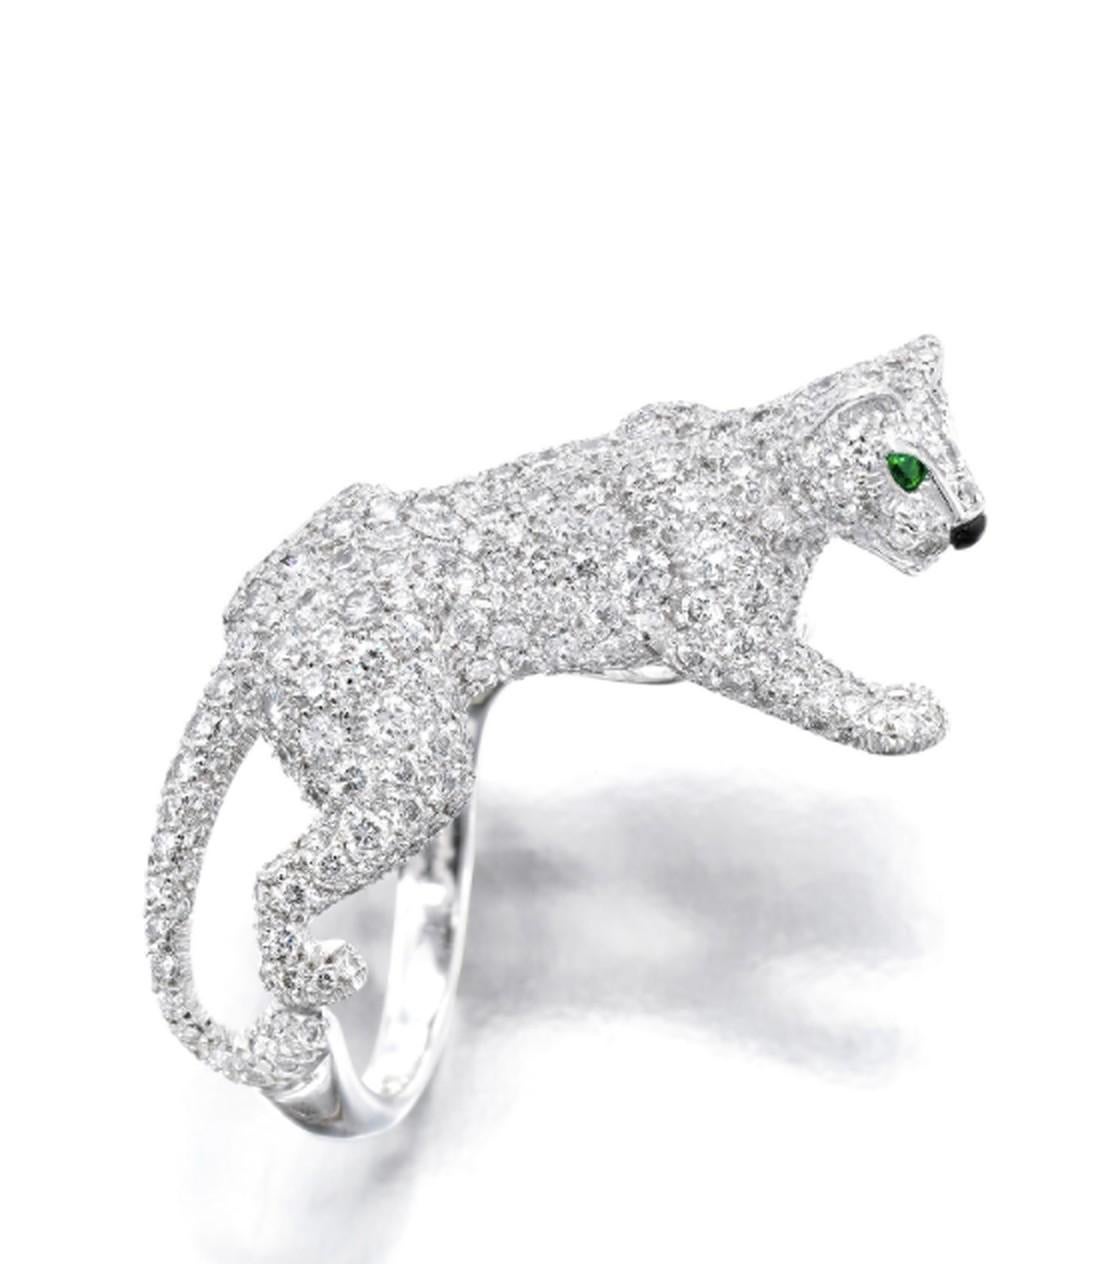 Mixed Cut Cartier Diamond, Emerald and Onyx Panthère Ring For Sale